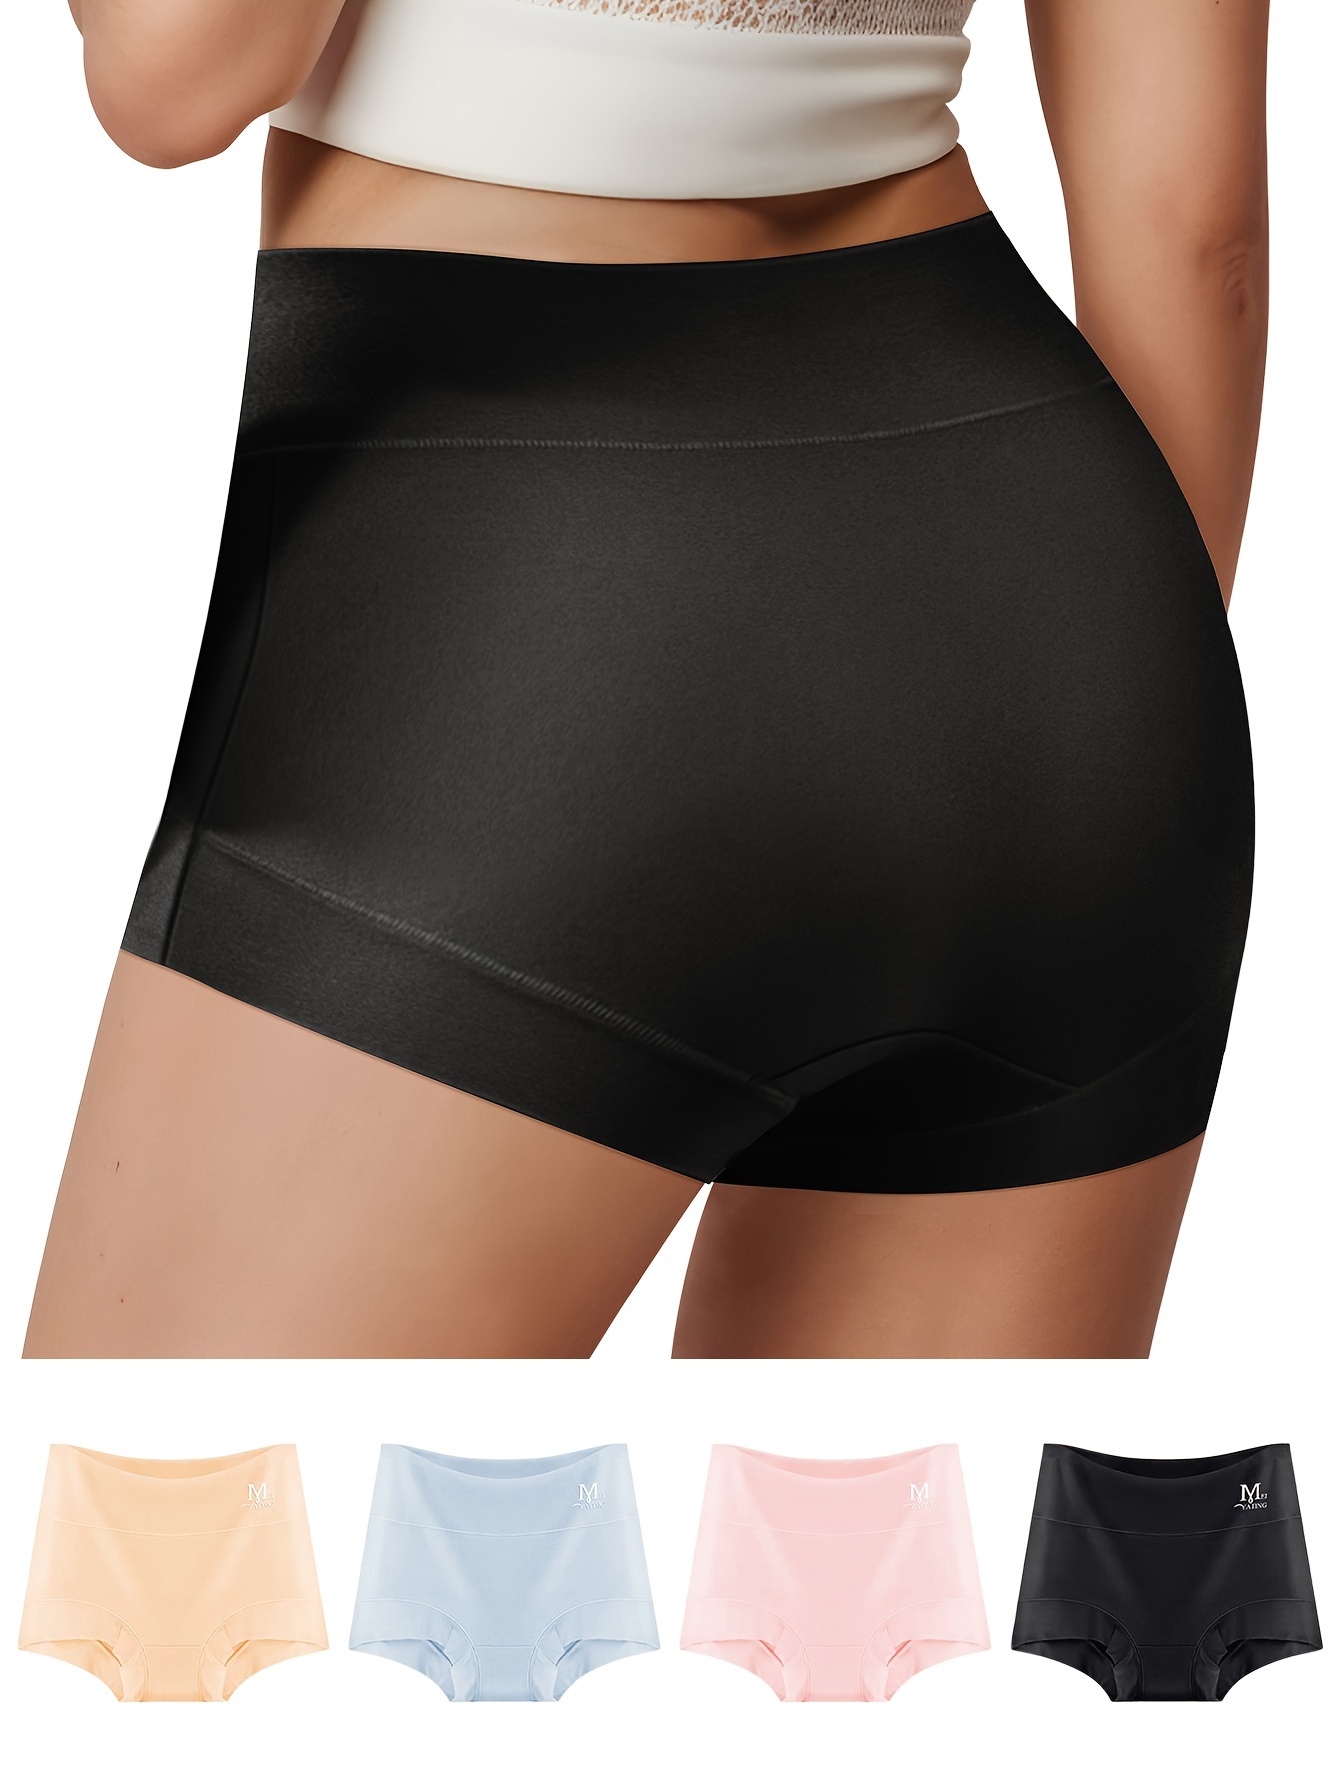 Boy Shorts for Women | Long Panty | Boxer for Girls (Pack of 4) Plus Size